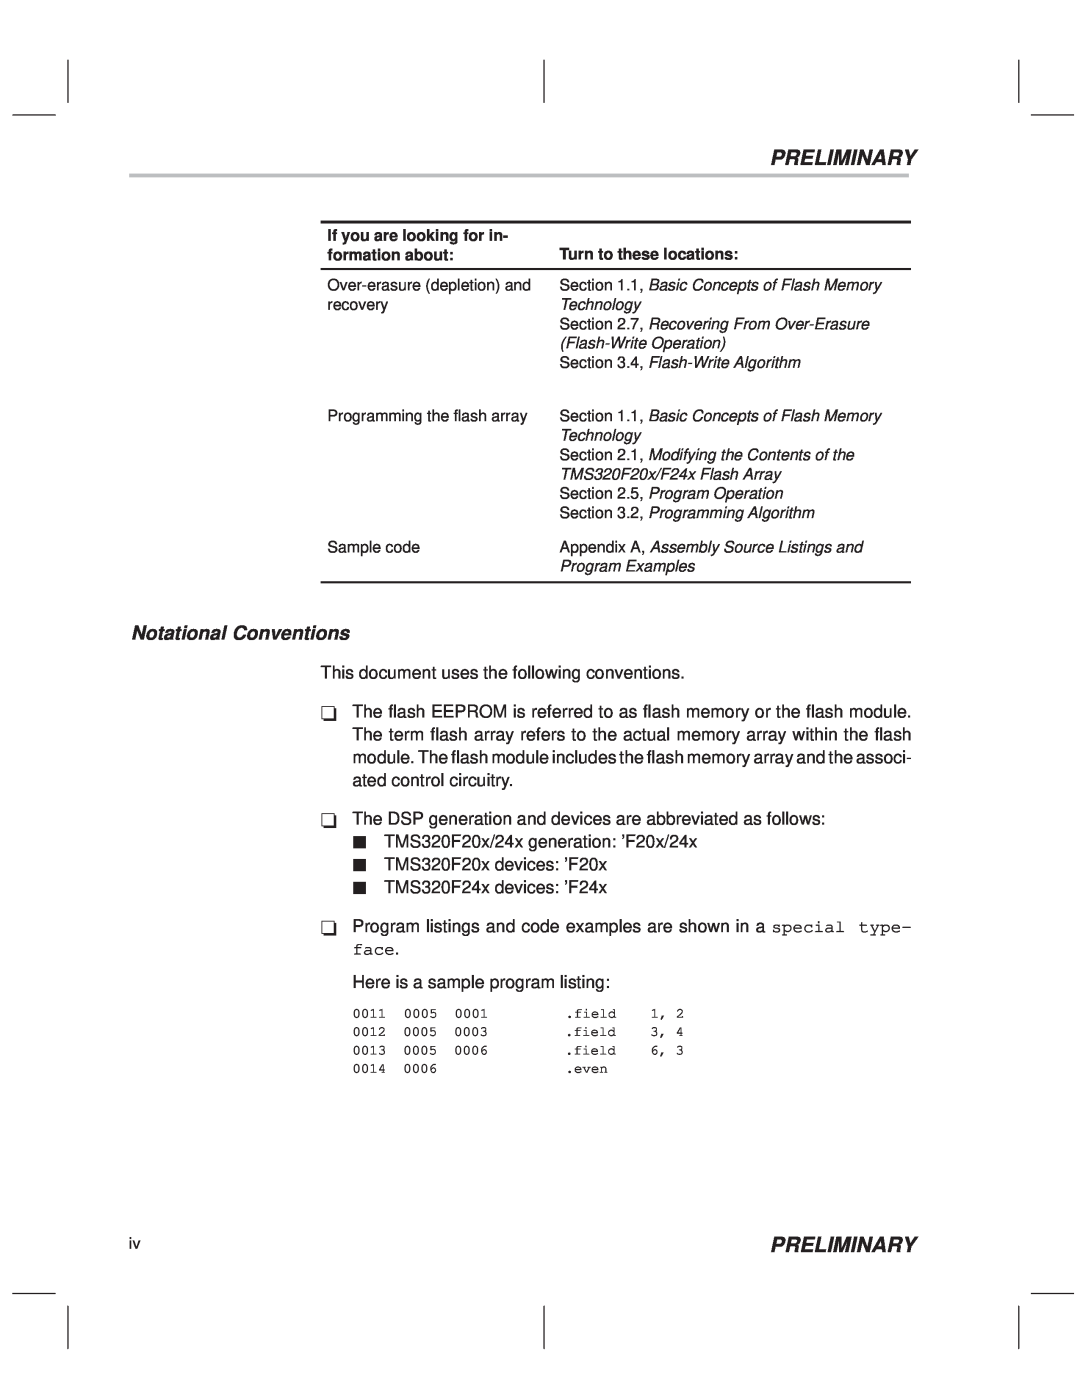 Texas Instruments TMS320F20x/F24x DSP Preliminary, Notational Conventions, This document uses the following conventions 